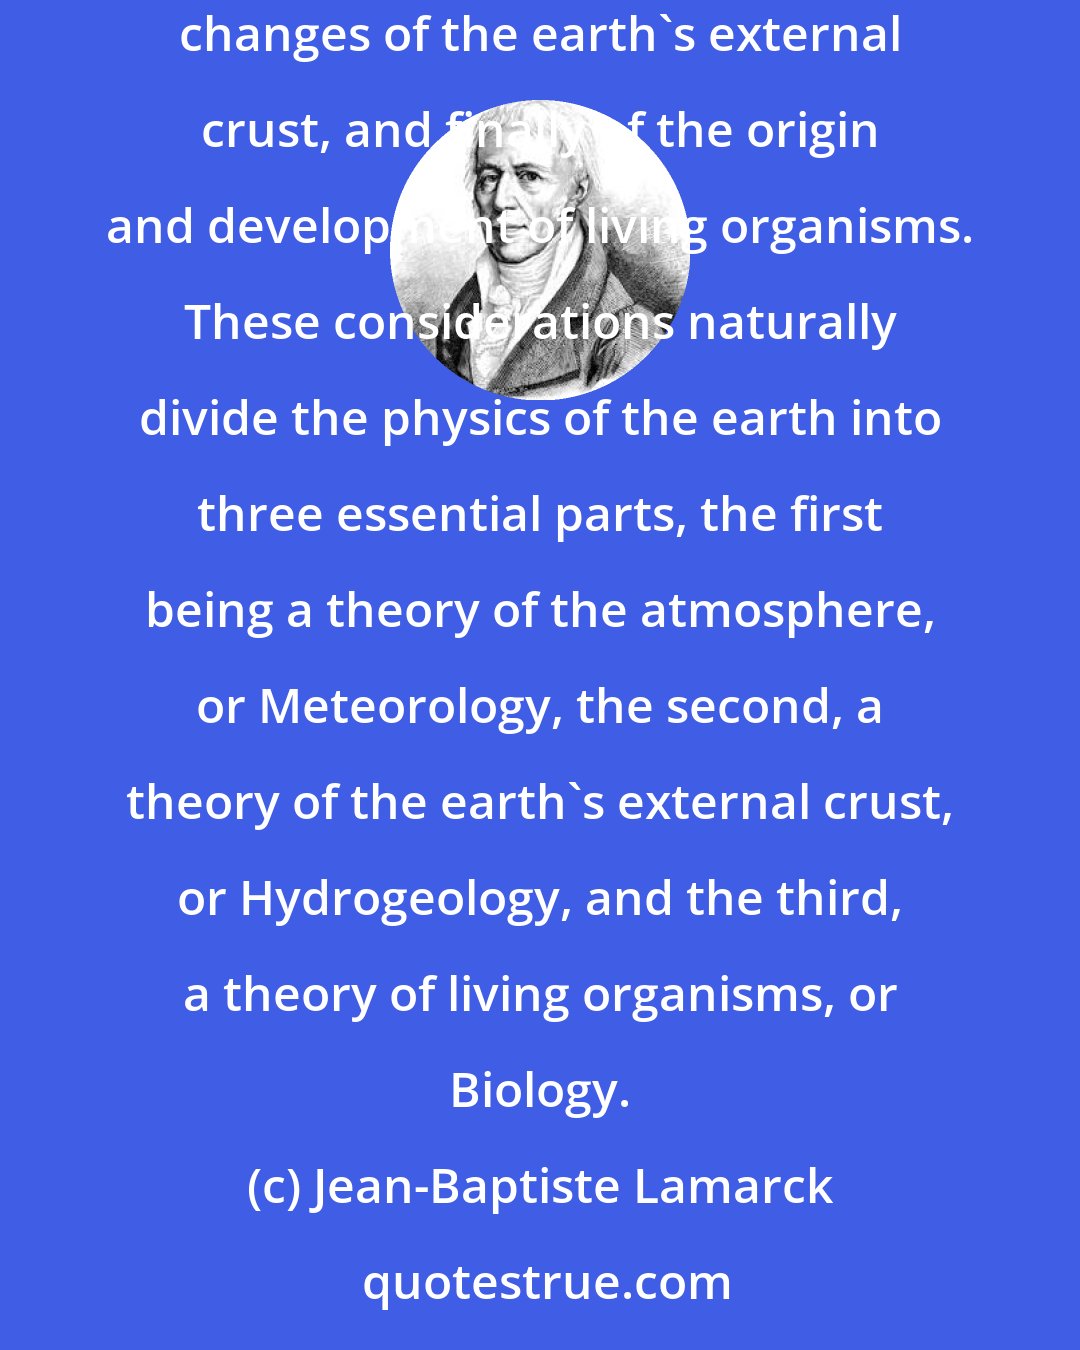 Jean-Baptiste Lamarck: A sound Physics of the Earth should include all the primary considerations of the earth's atmosphere, of the characteristics and continual changes of the earth's external crust, and finally of the origin and development of living organisms. These considerations naturally divide the physics of the earth into three essential parts, the first being a theory of the atmosphere, or Meteorology, the second, a theory of the earth's external crust, or Hydrogeology, and the third, a theory of living organisms, or Biology.